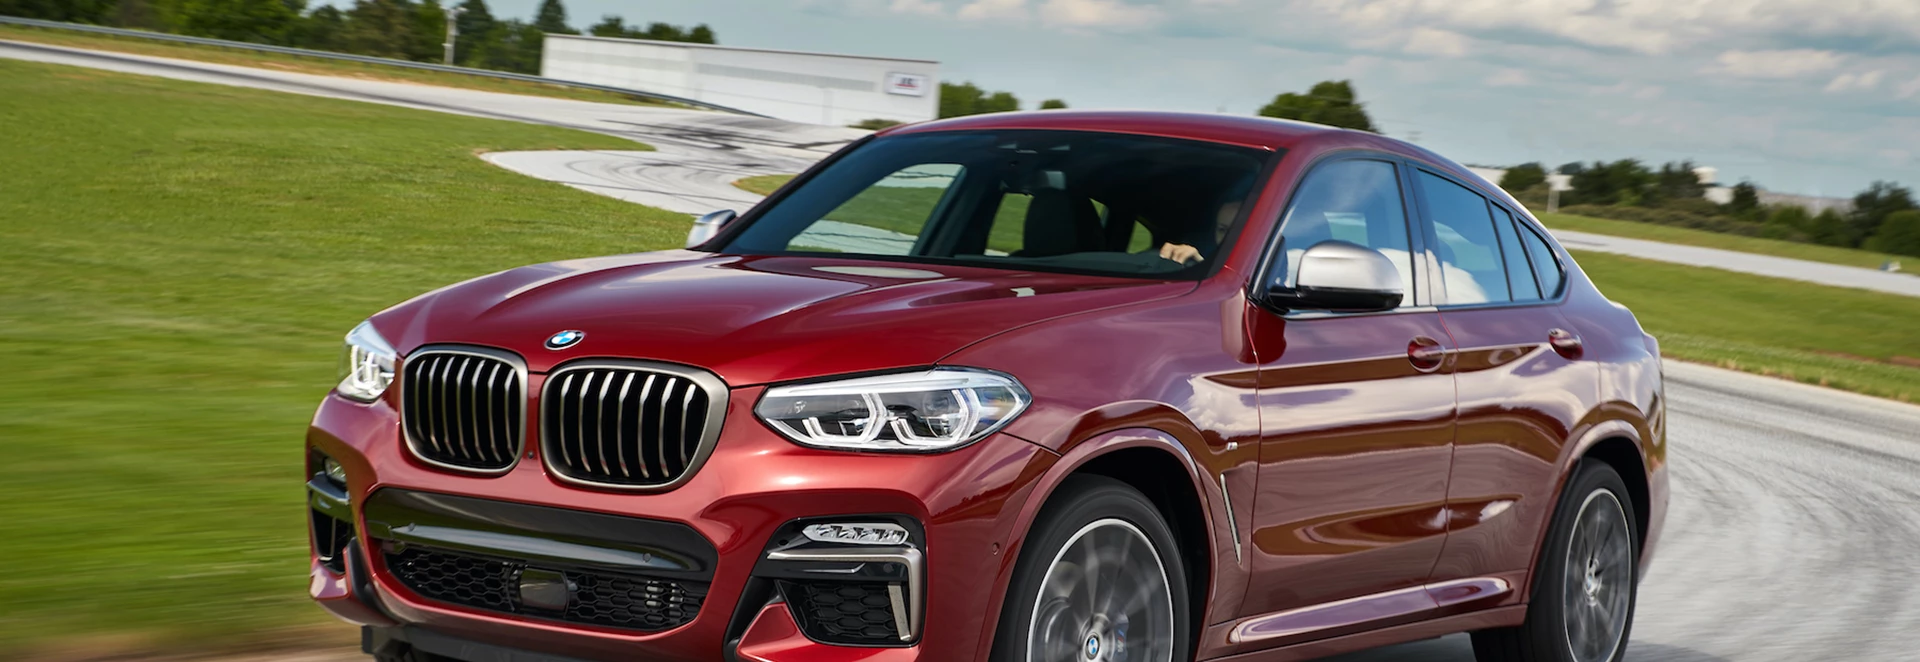 Buyer’s guide to the BMW X4 